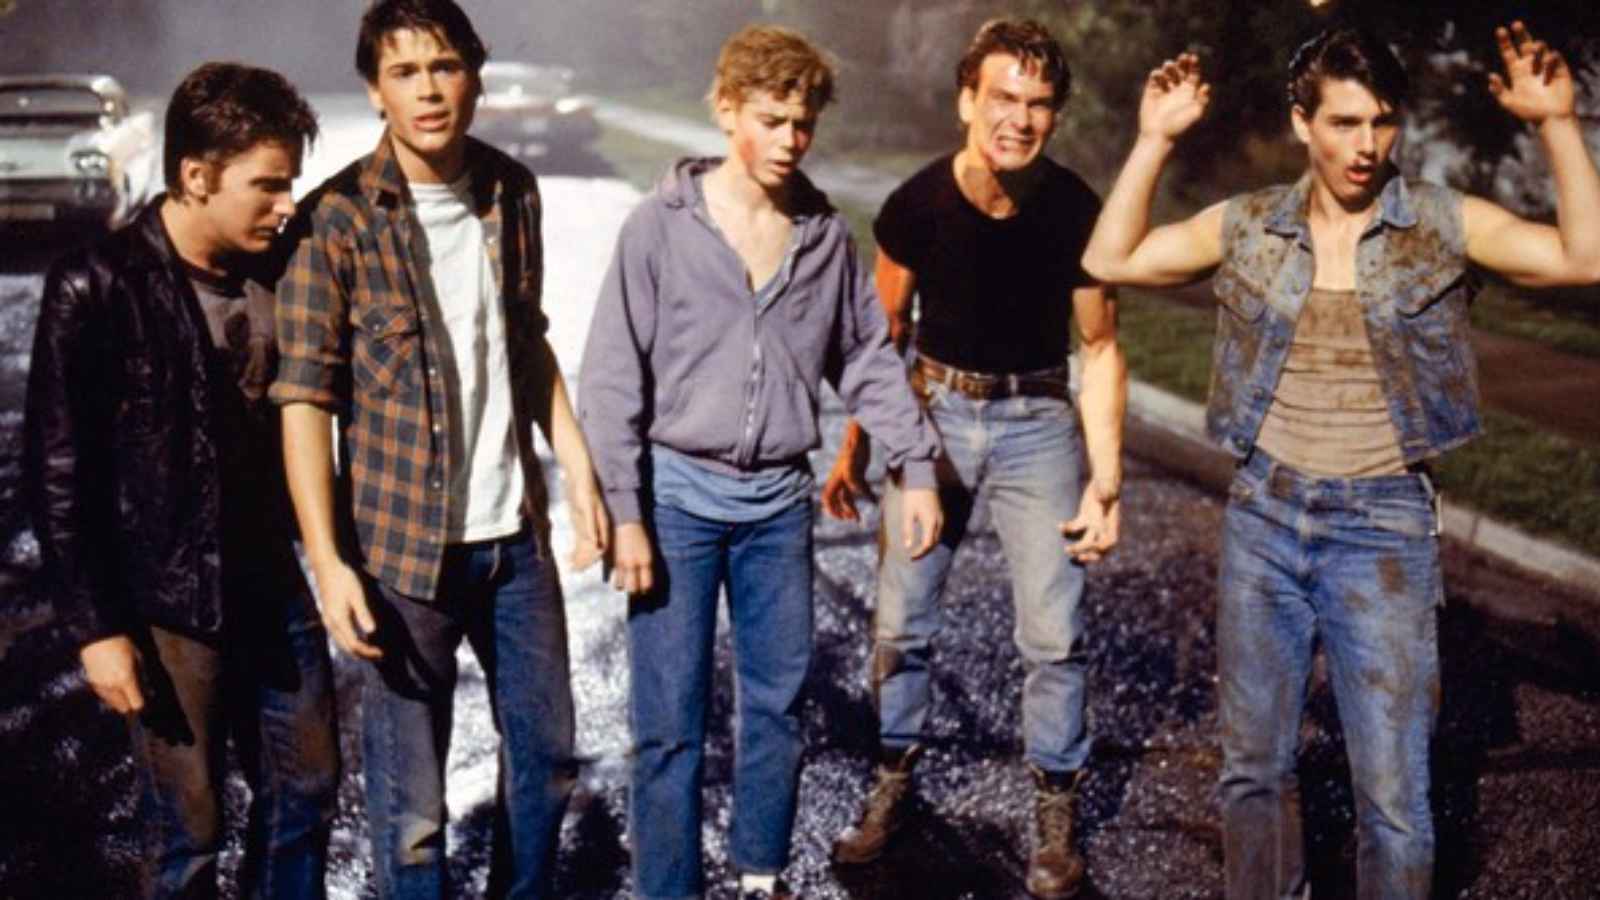 Where To Watch The Outsiders: Streaming Options